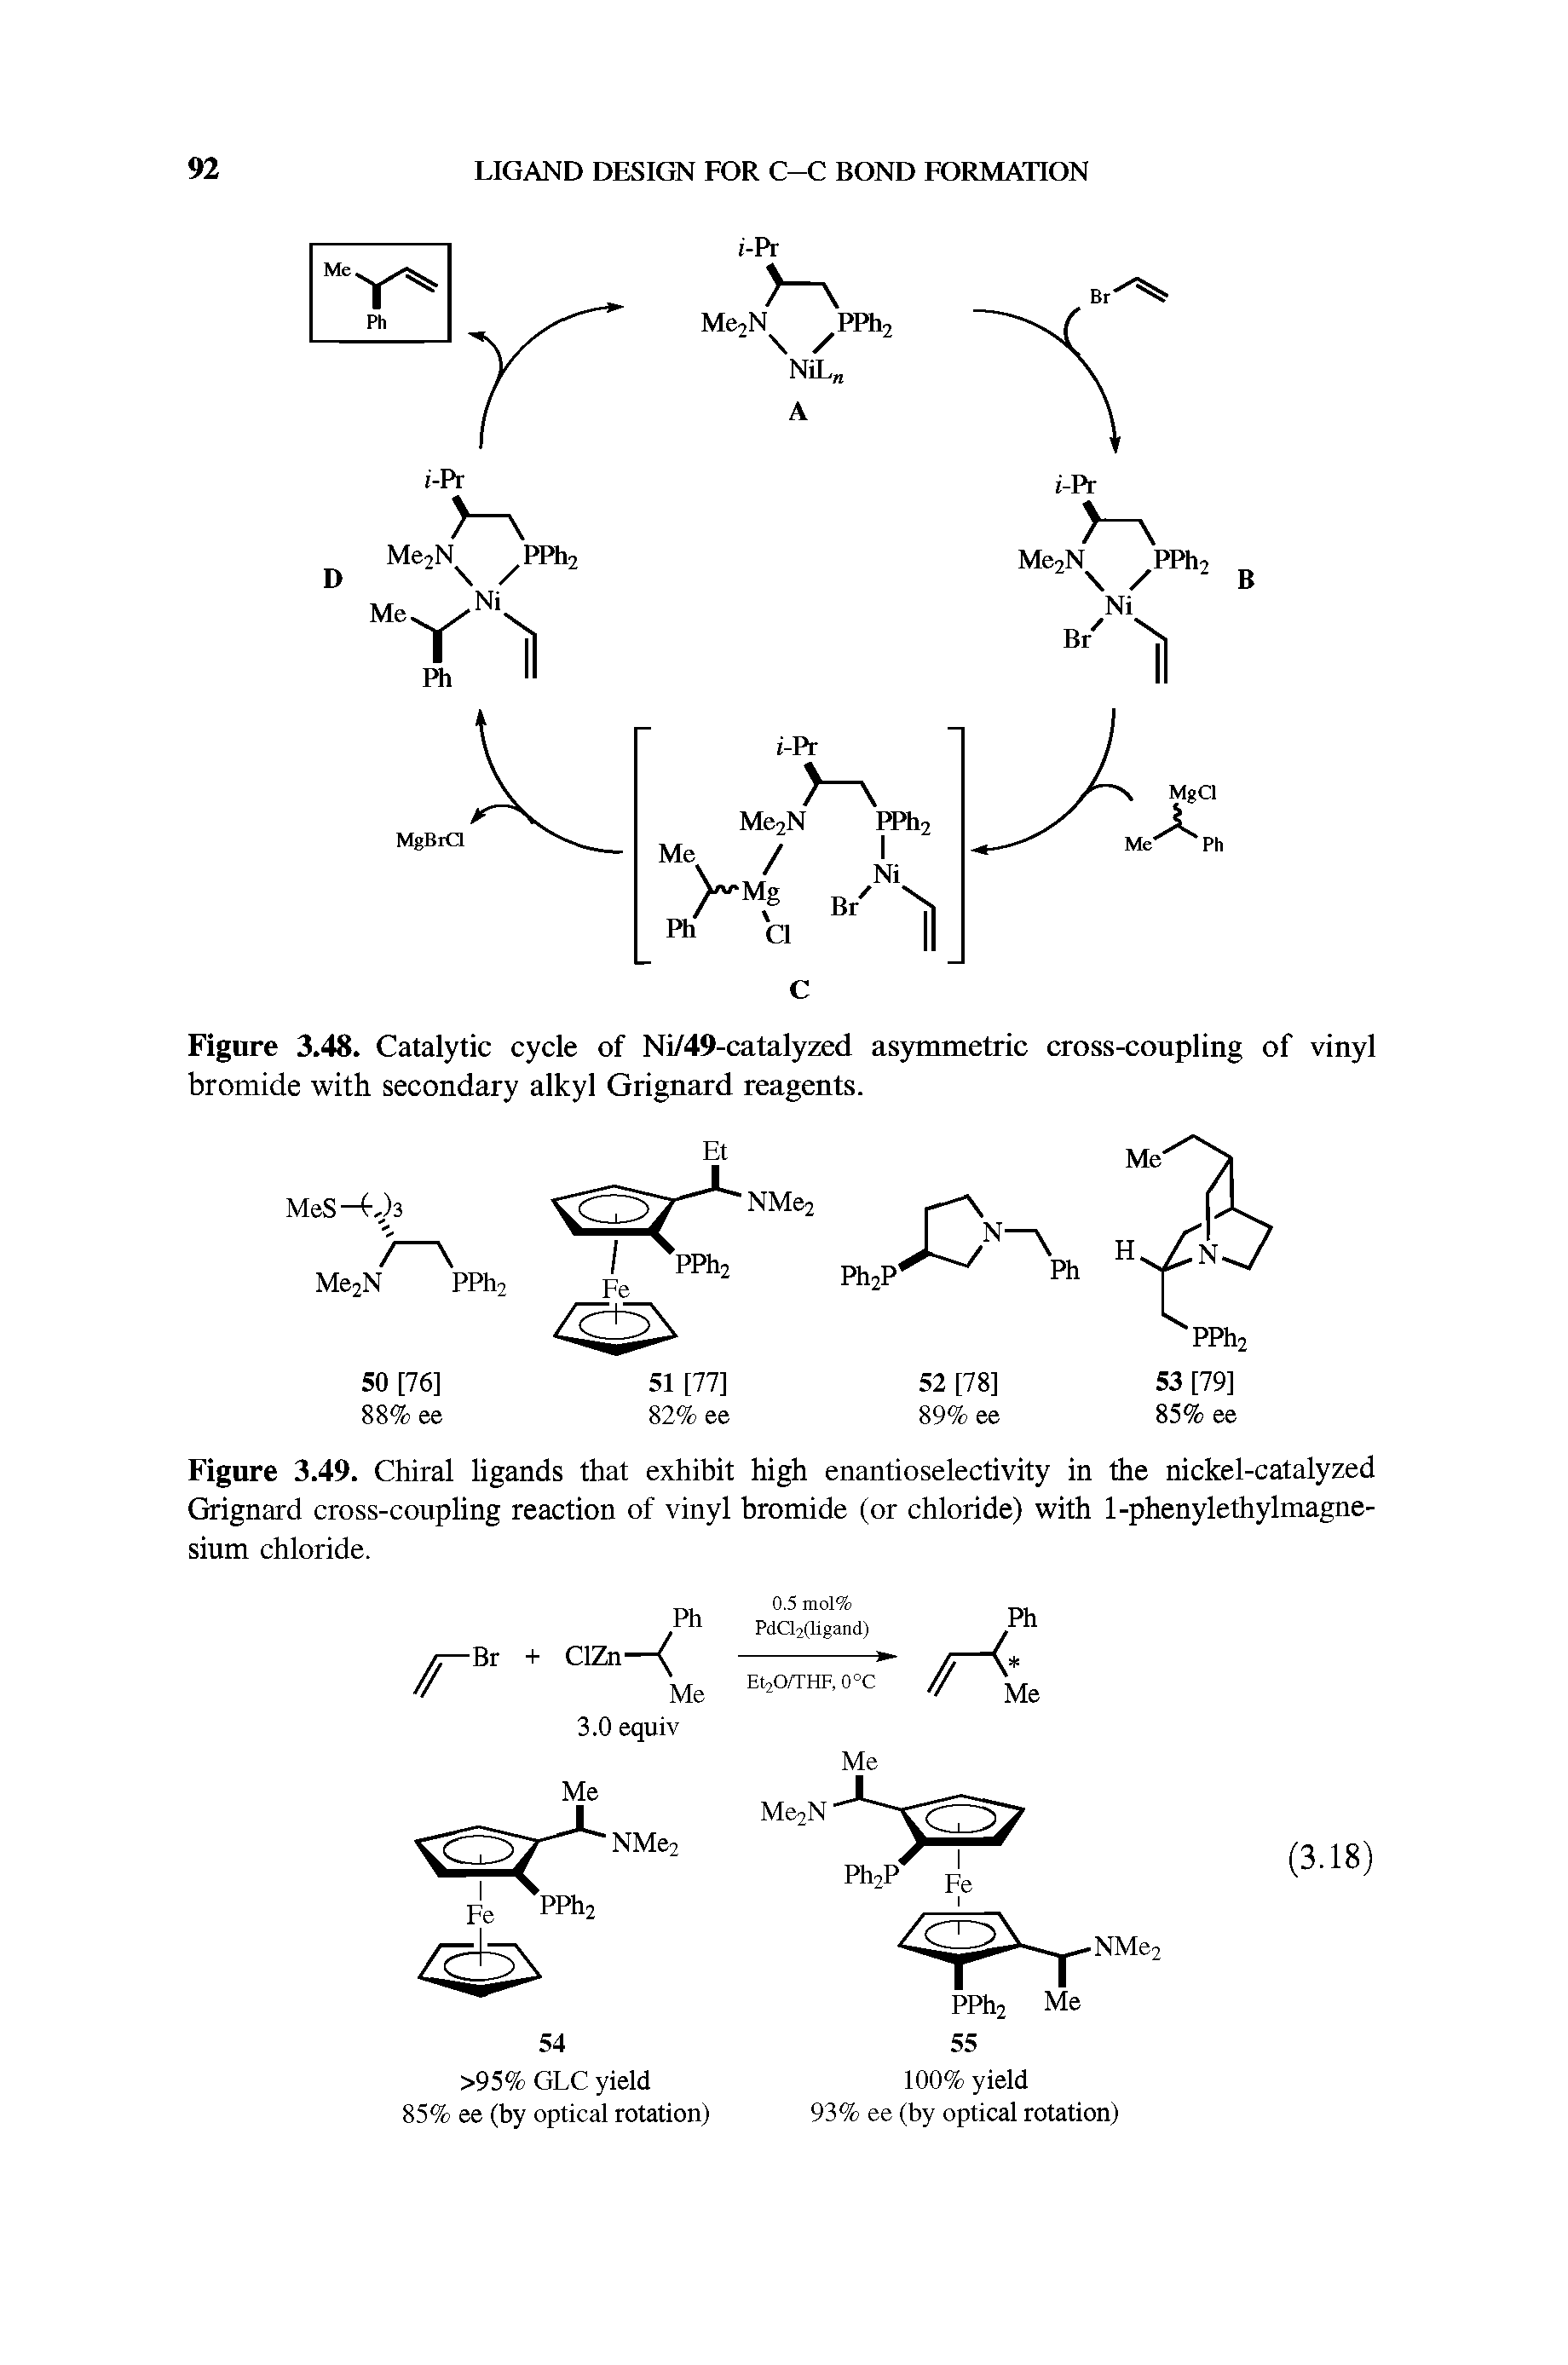 Figure 3.48. Catalytic cycle of Ni/49-catalyzed as5mimetric cross-coupling of vinyl bromide with secondary alkyl Grignard reagents.